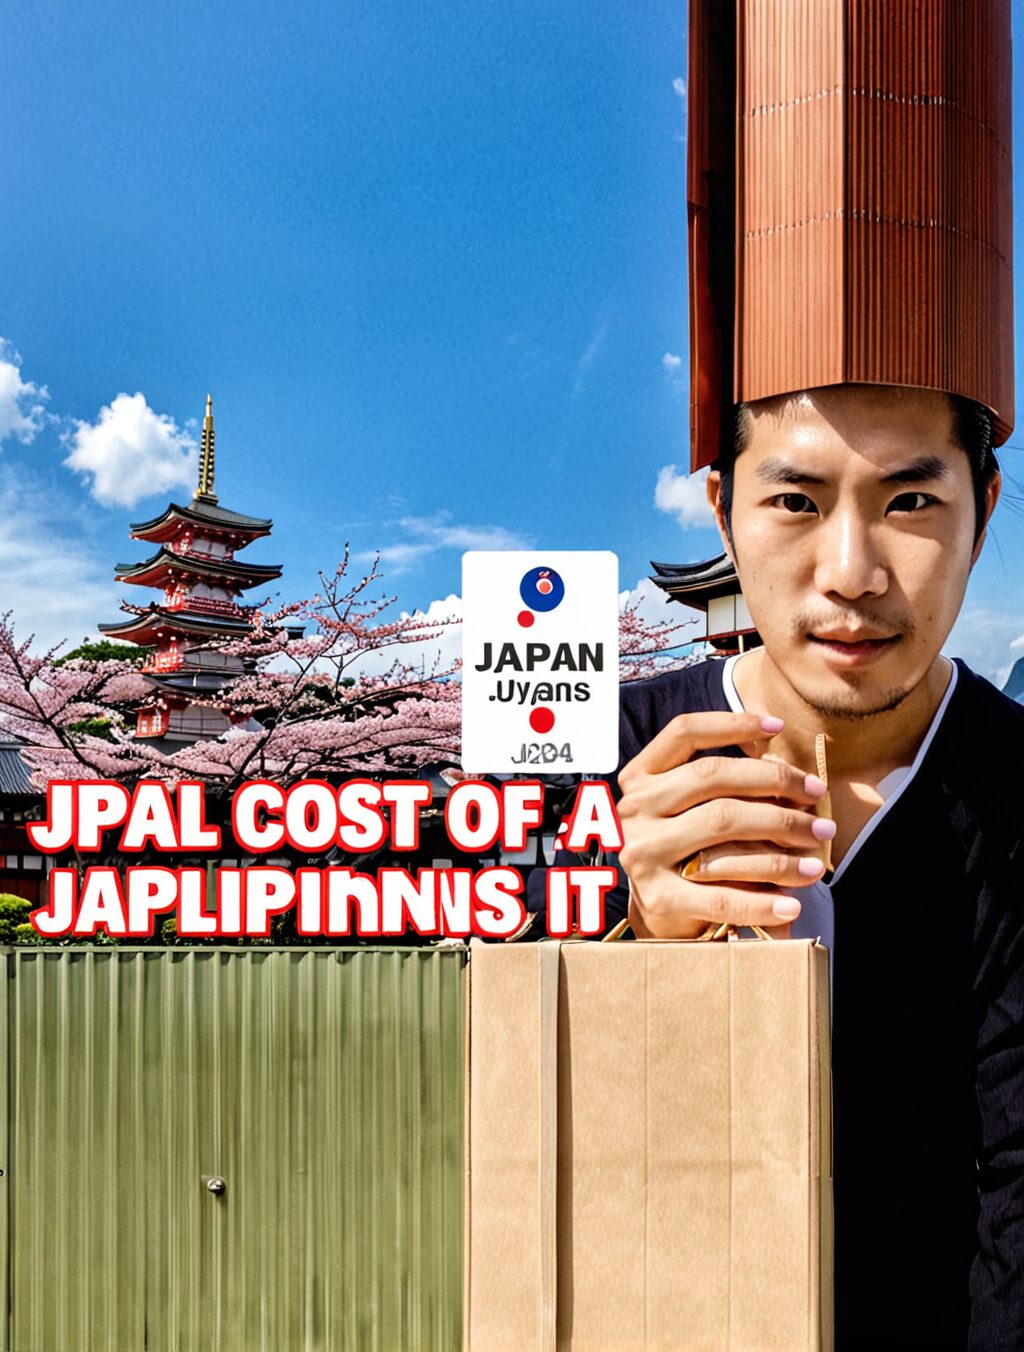 japan trip cost from philippines